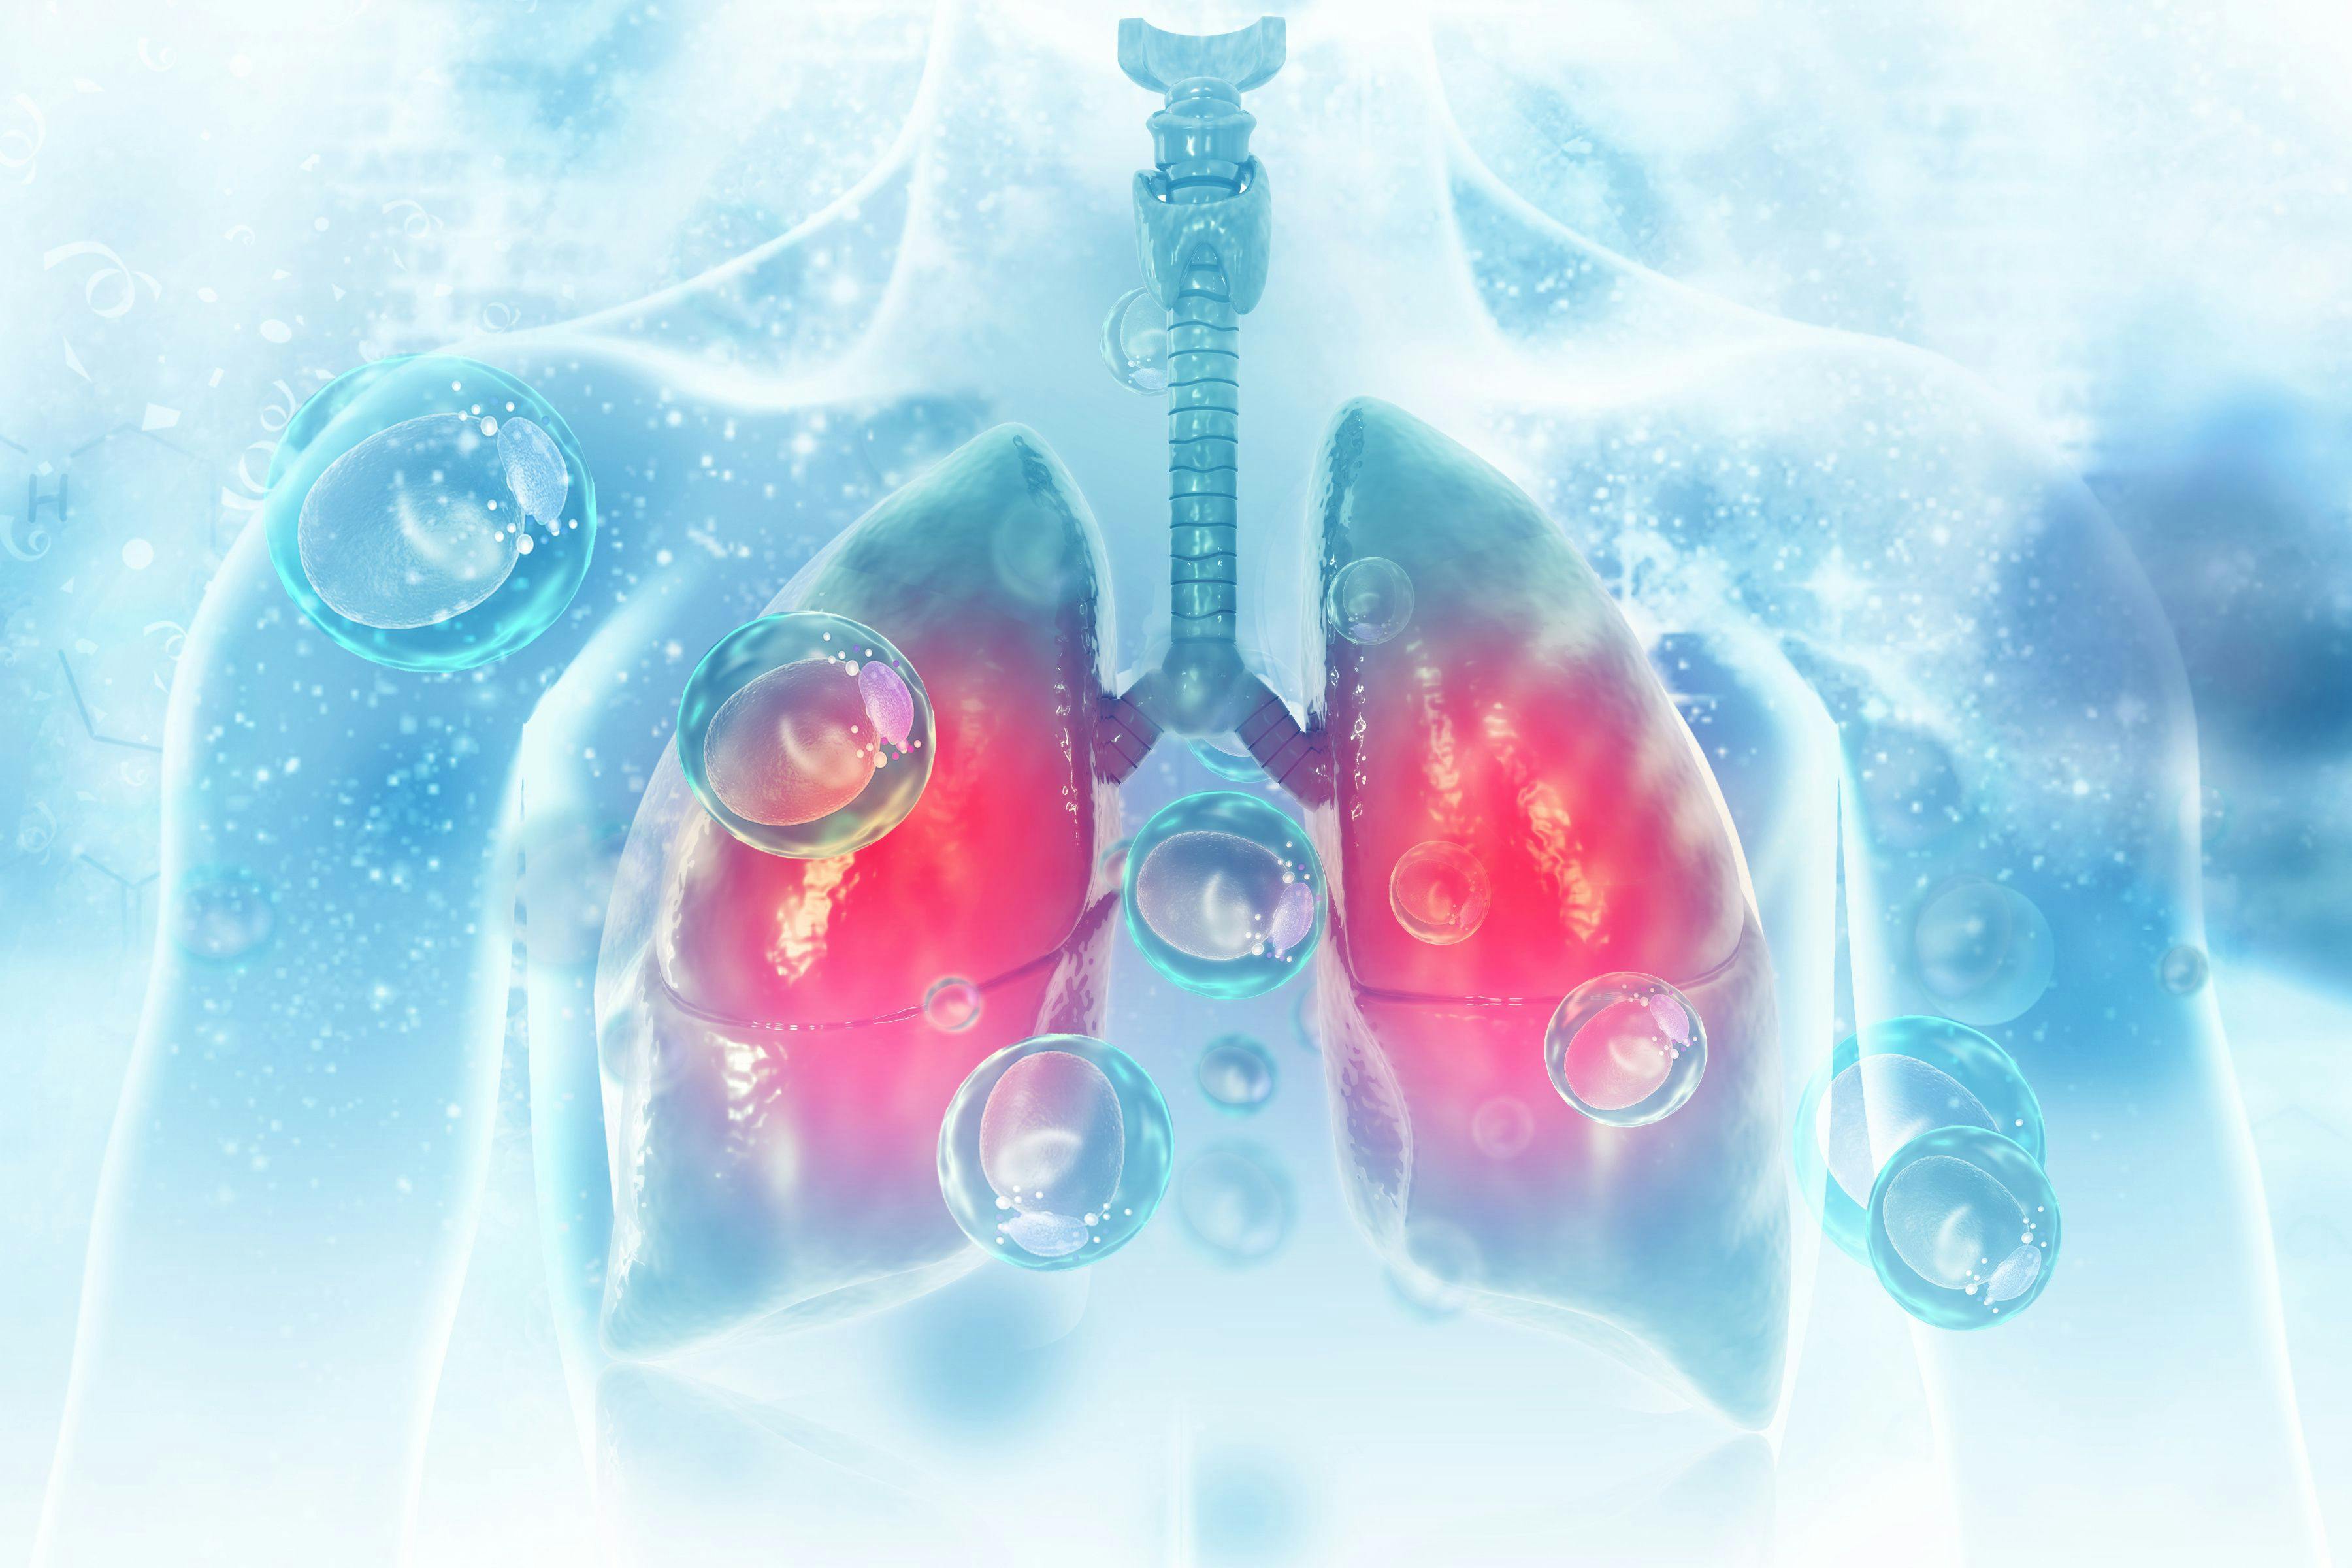 Virus and bacteria infected the Human lungs. lung disease | Image Credit: © Crystal light - www.stock.adobe.com